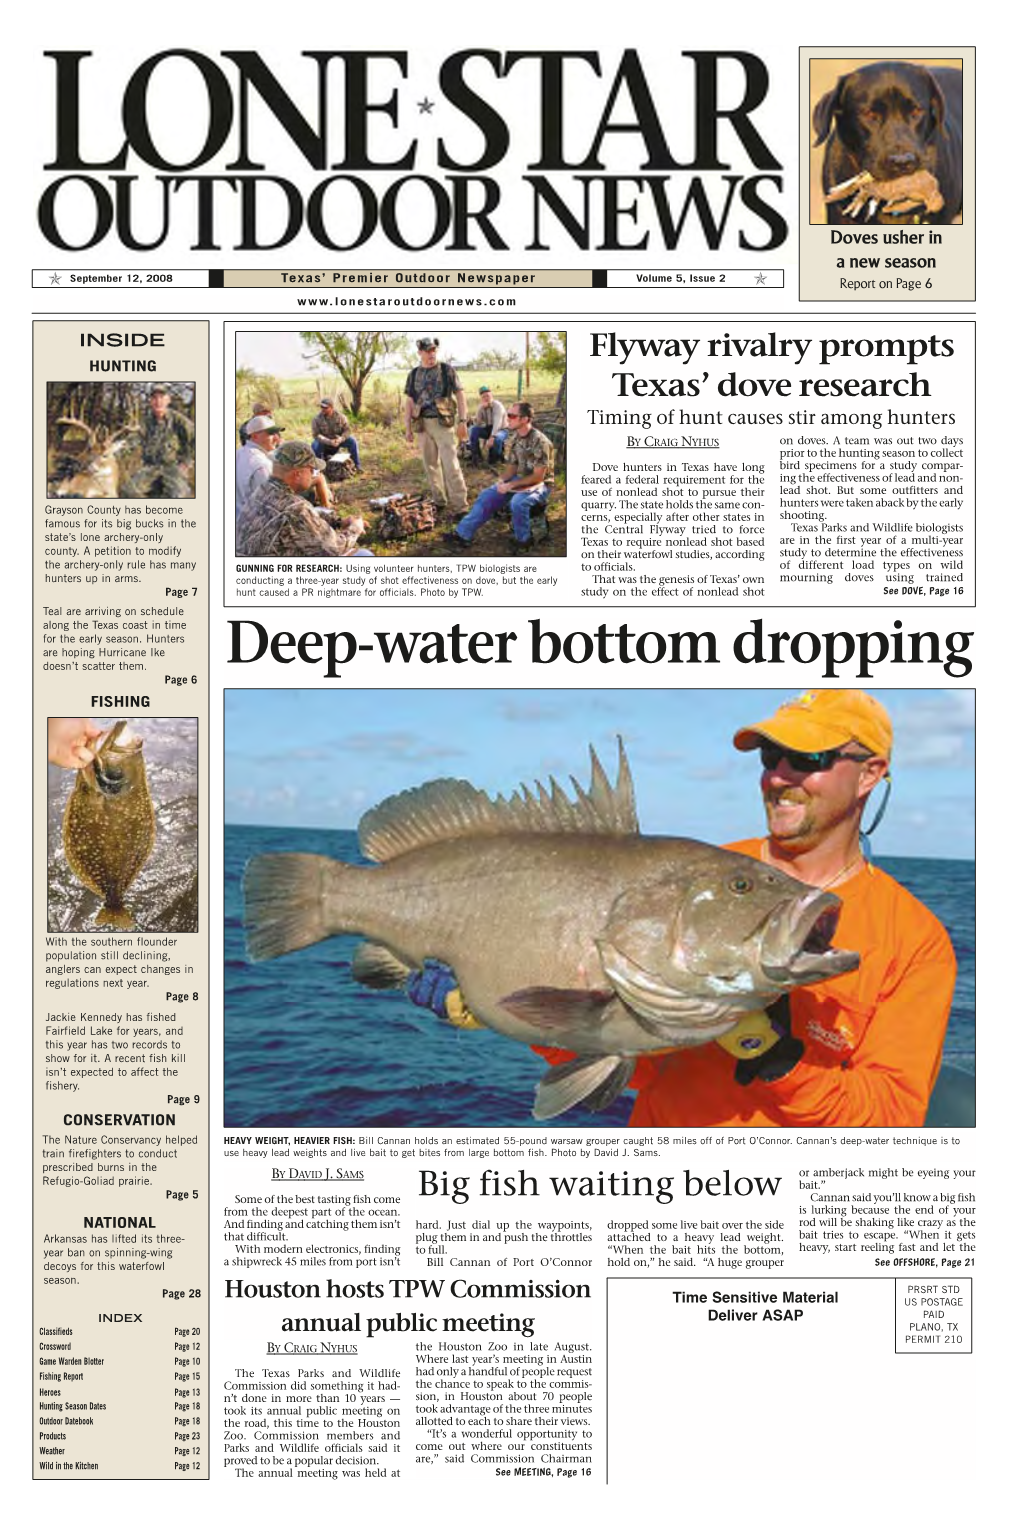 Deep-Water Bottom Dropping Page 6 FISHING